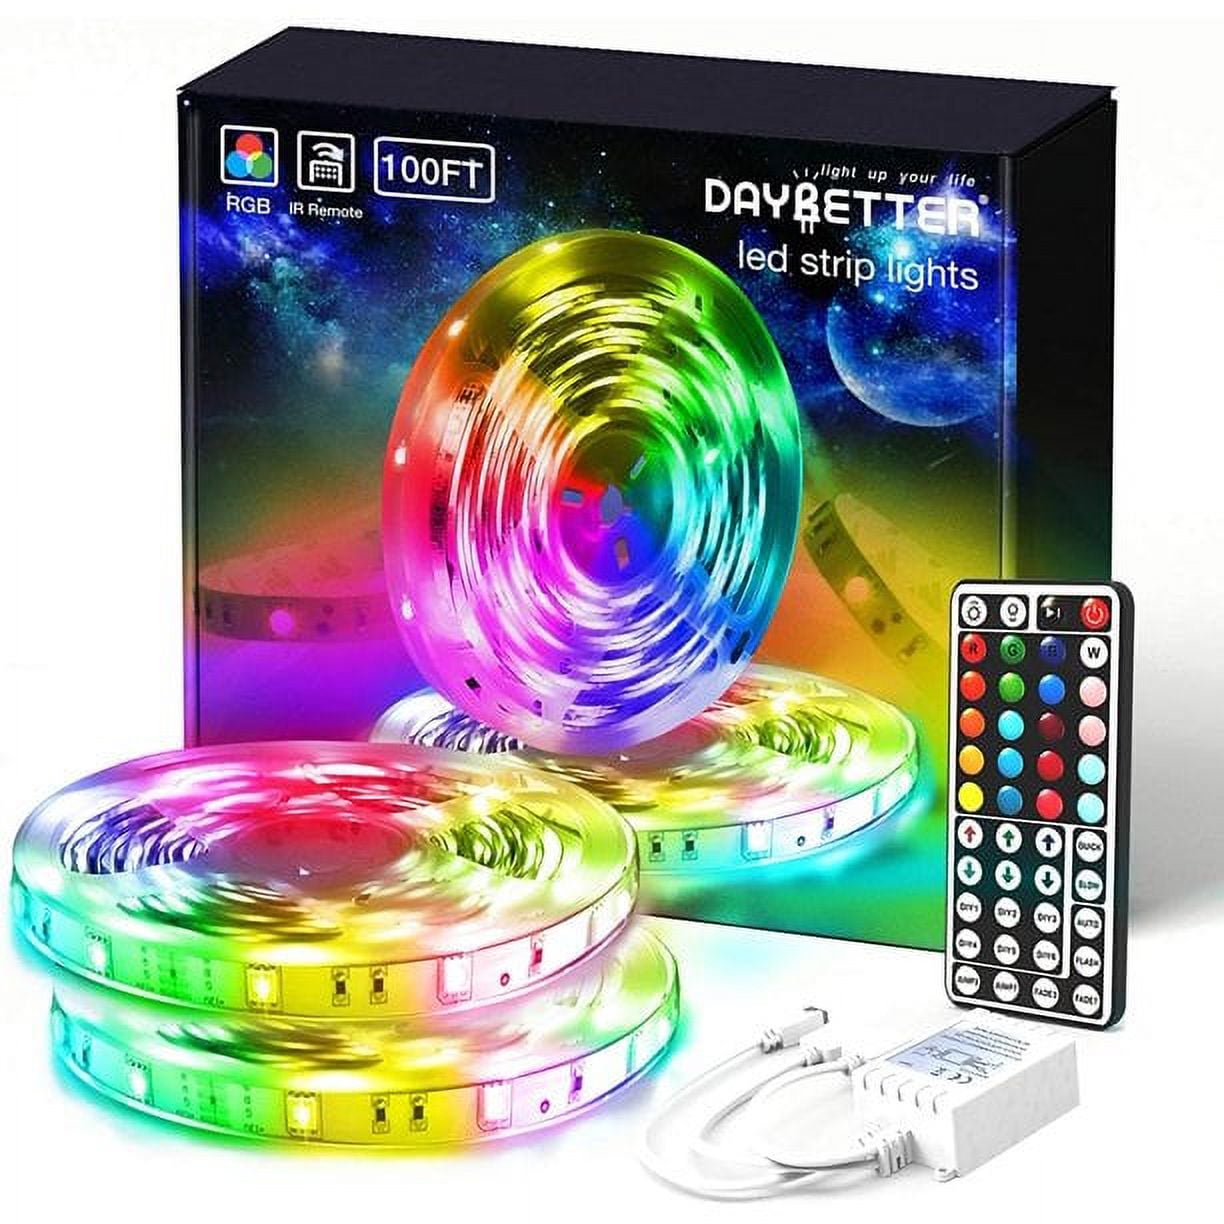 Daybetter 100ft Led Strip Lights Color Changing 44Keys Remote Controller 12V Power Supply Flexible Cuttable Lights Bedroom 2rd Gen SMD 5050 B14a138a B031 4bb9 98dc F4b1427dc306.a45df44b7aa5c3d967b436a7384764d0 